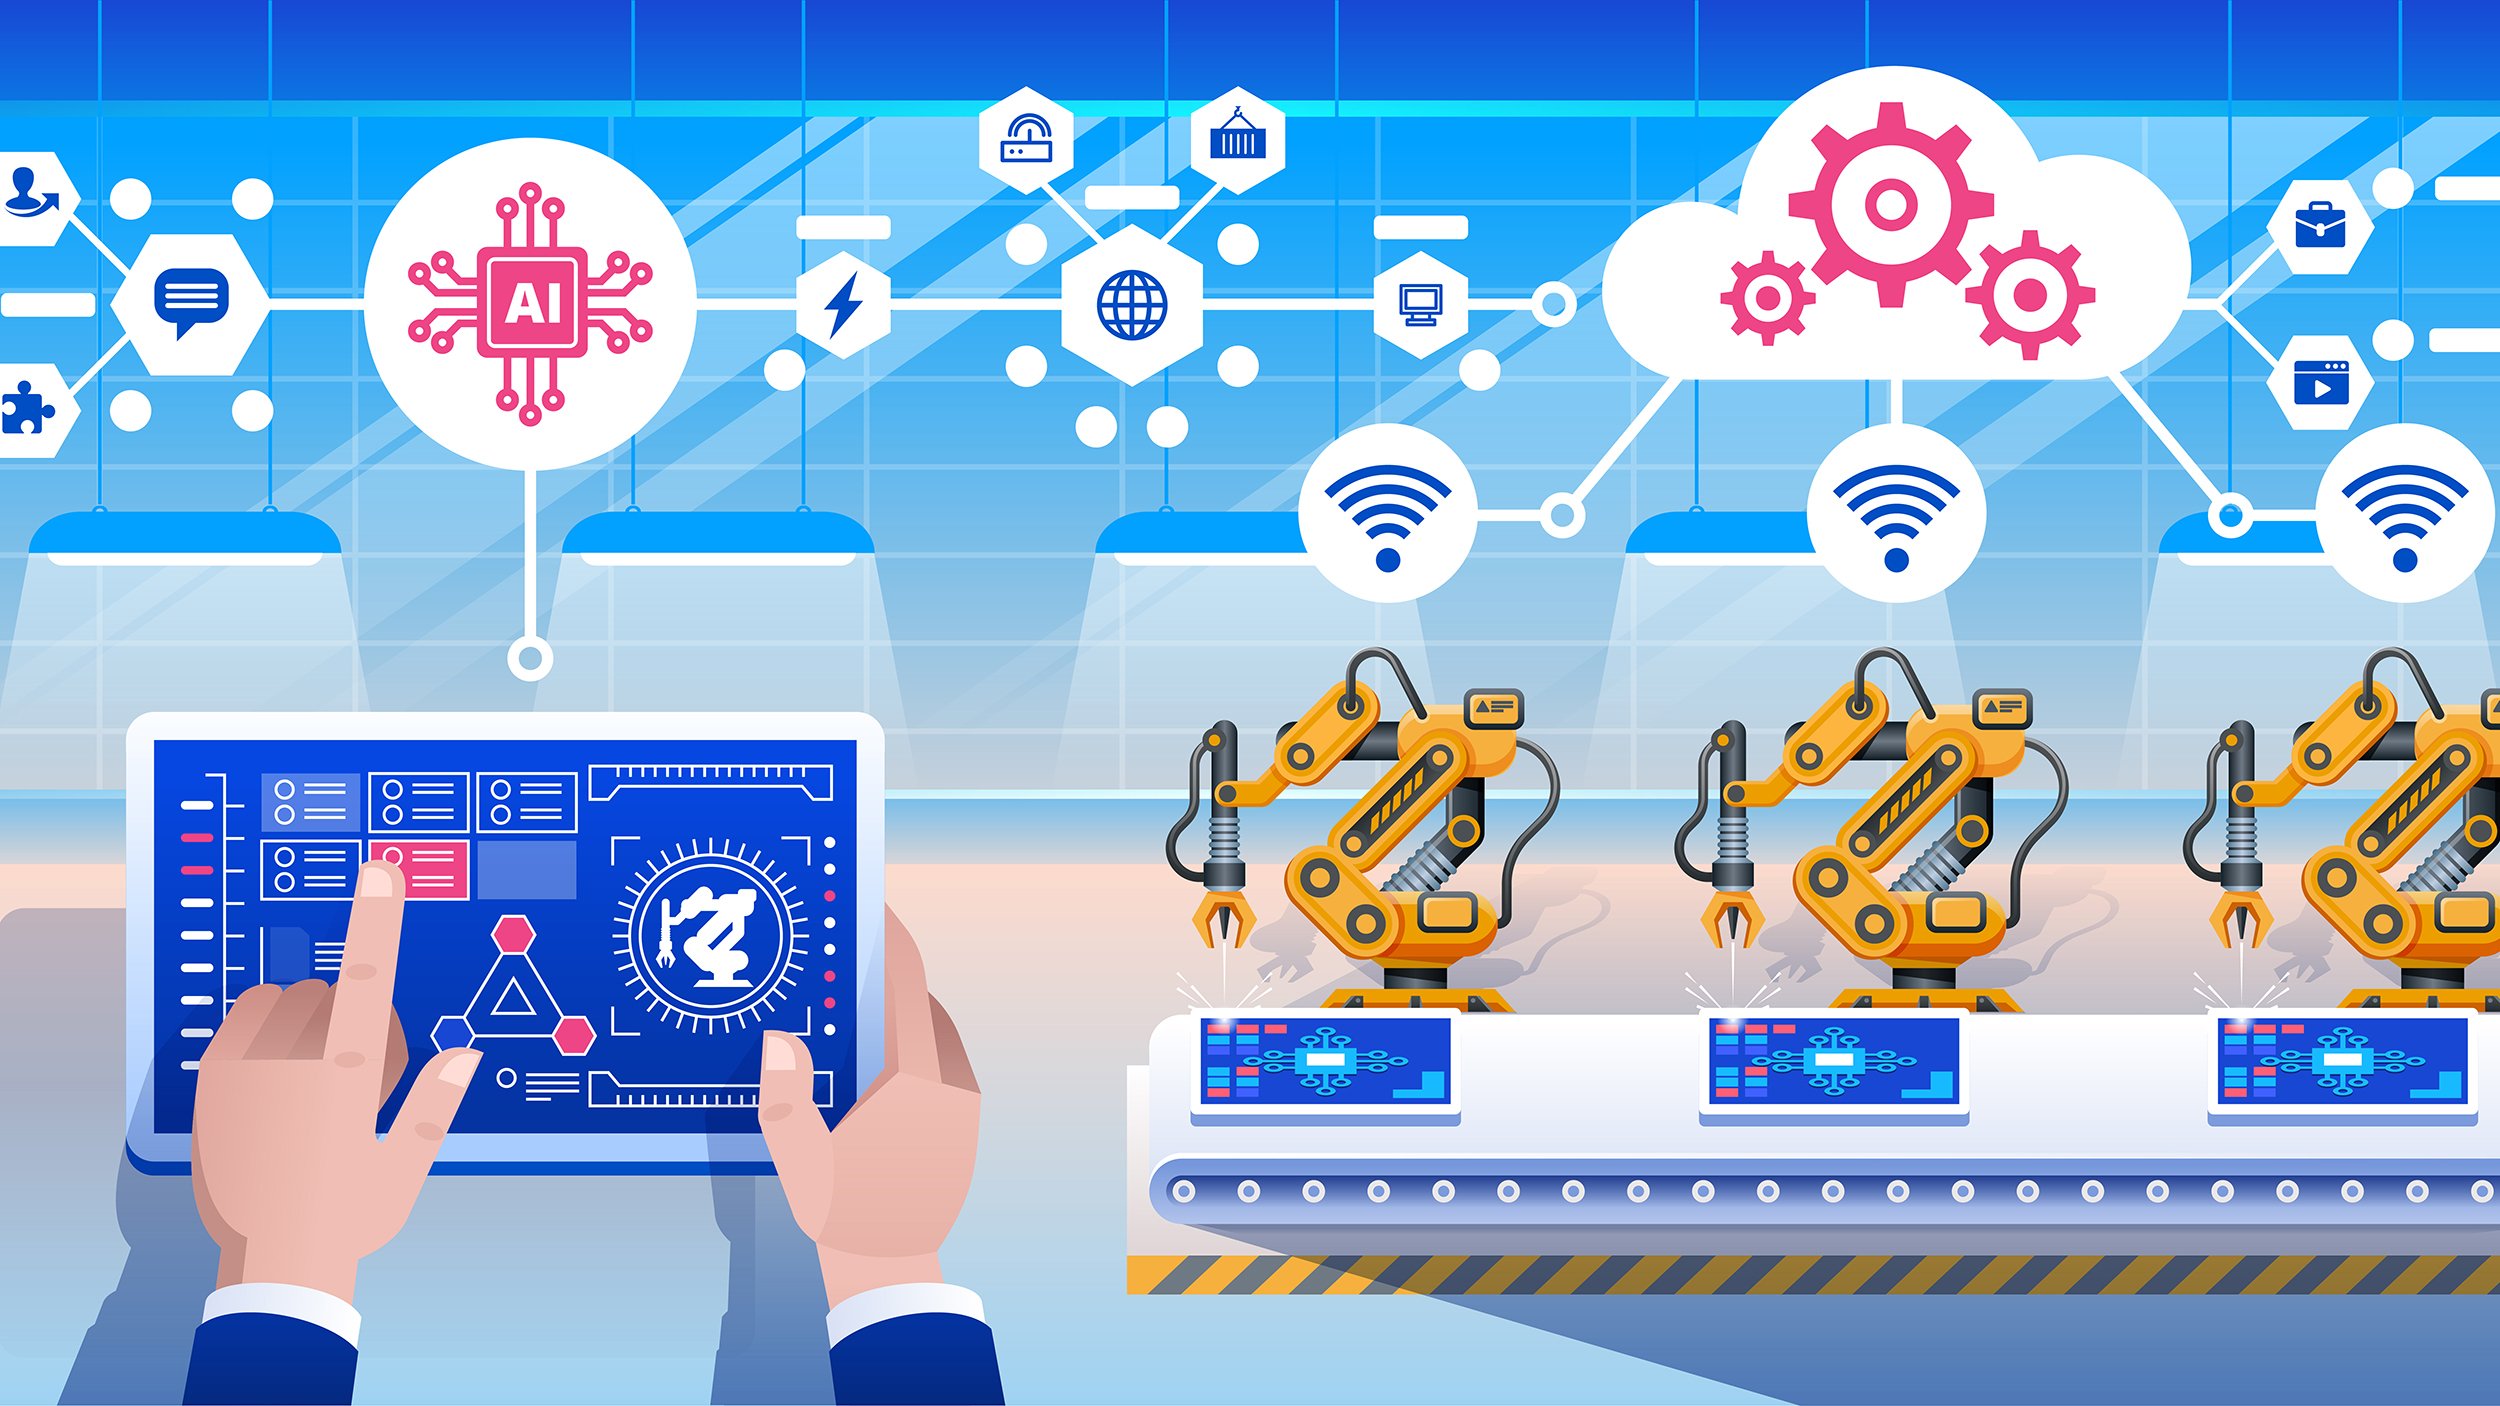 Smart industry 4.0 infographic. Man connecting with a factory using tablet and exchanging data with a neural network. Artificial intelligence. Vector illustration.